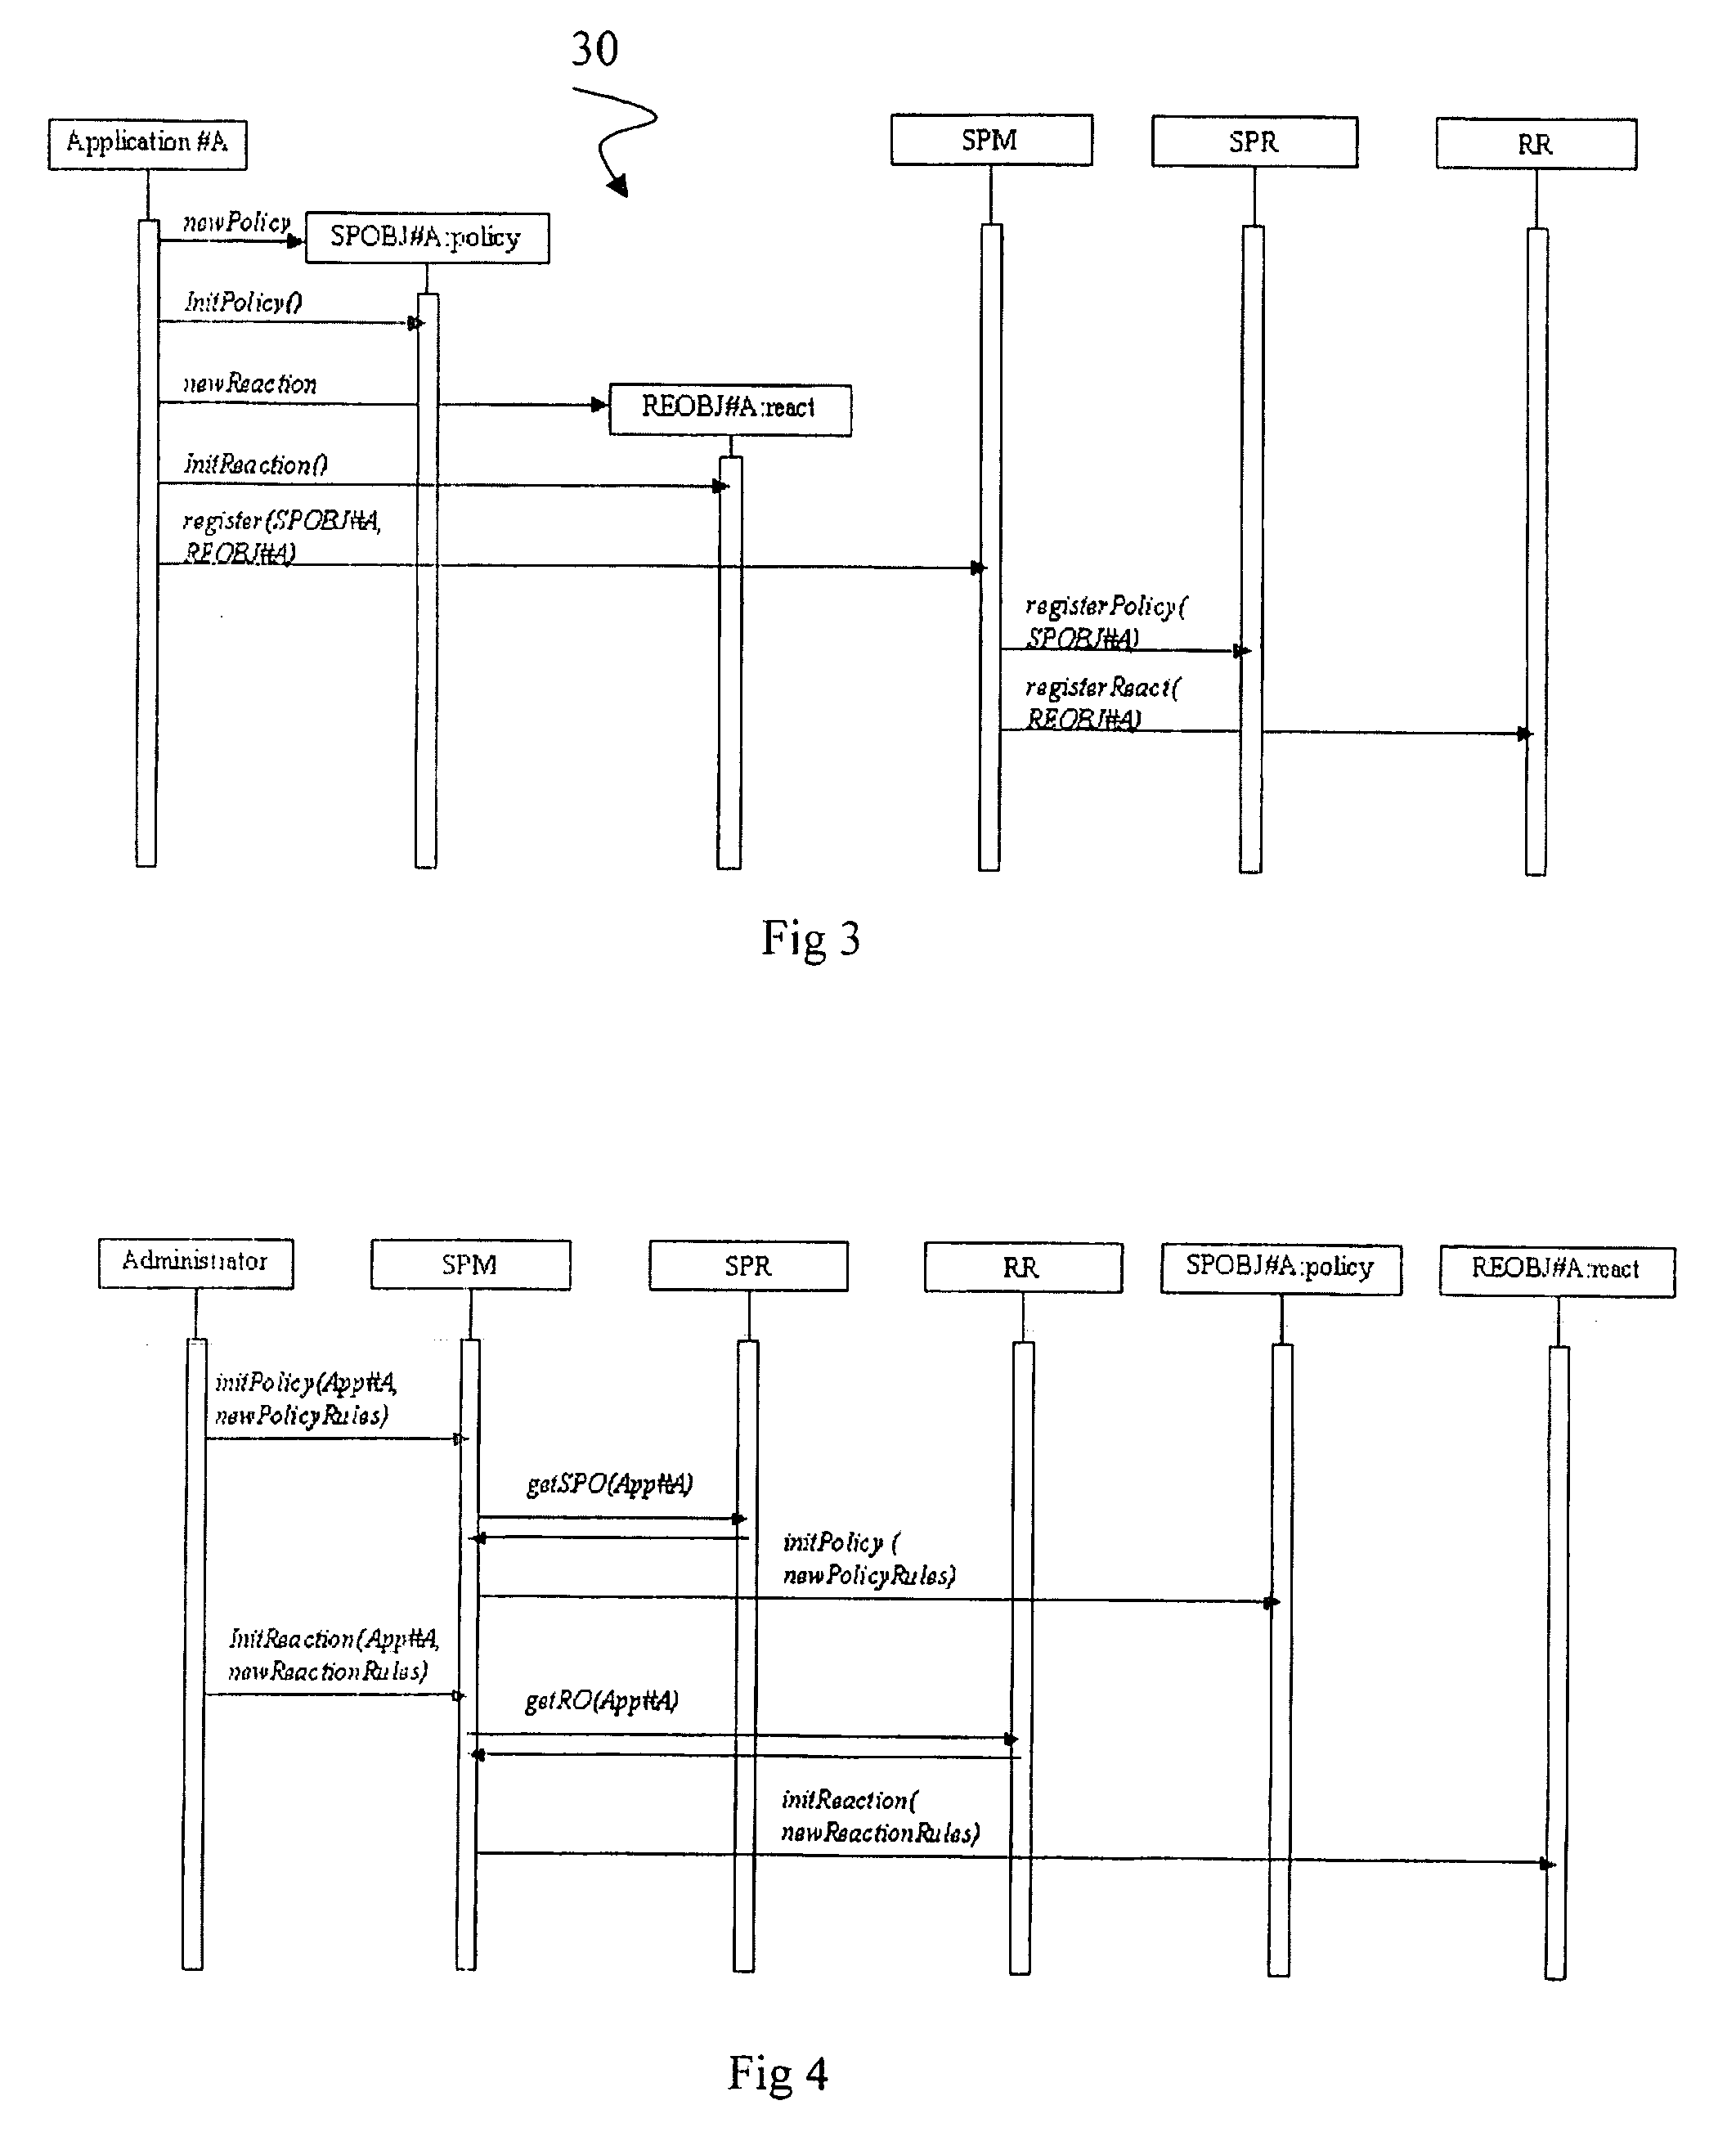 Multi-application IC card with secure management of application